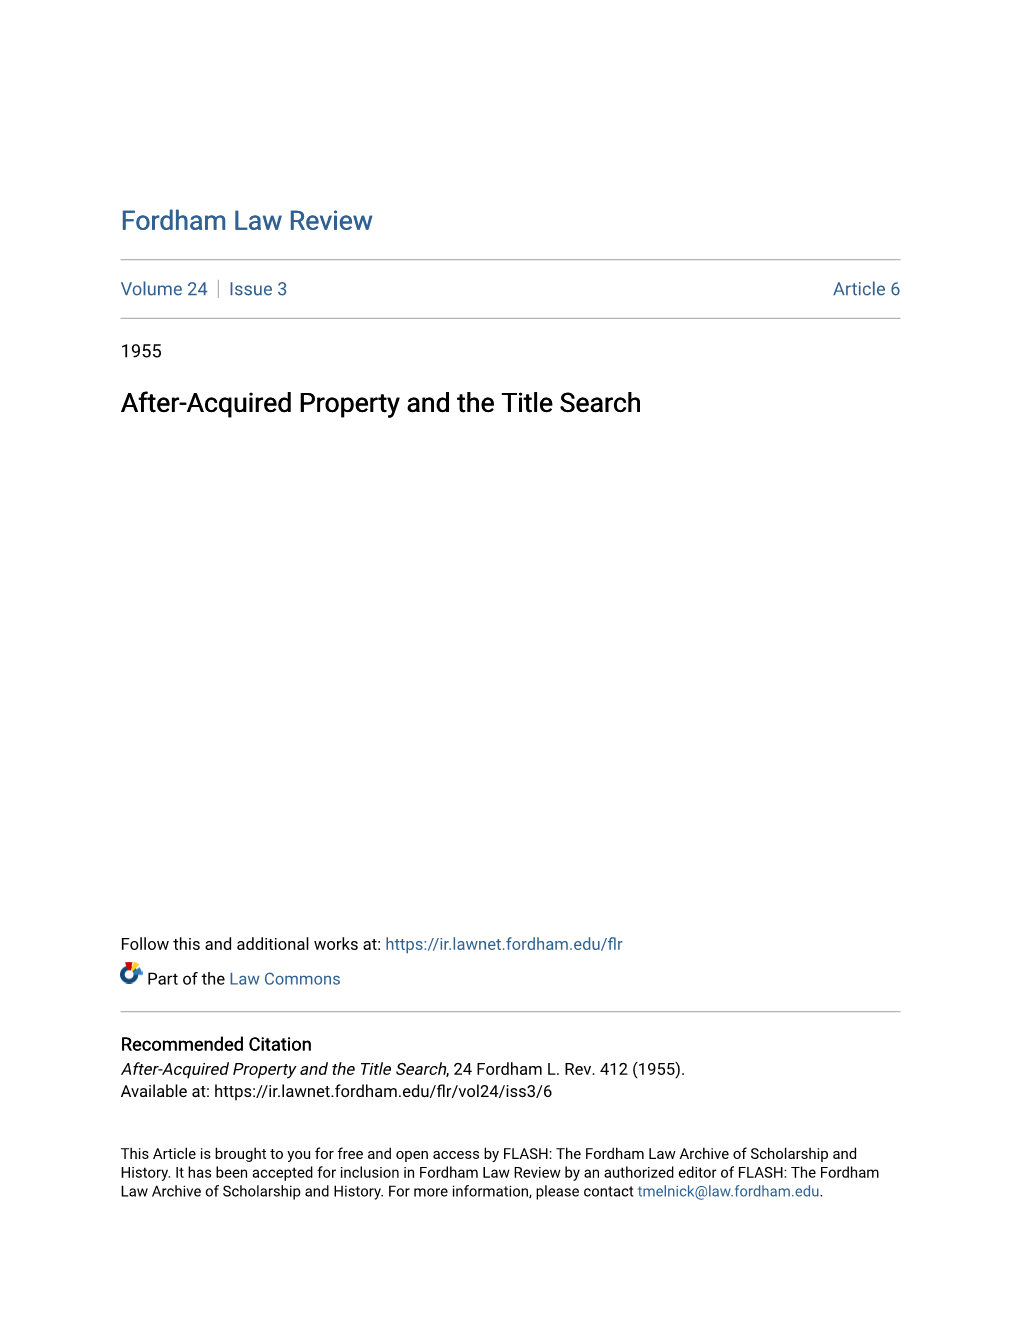 After-Acquired Property and the Title Search